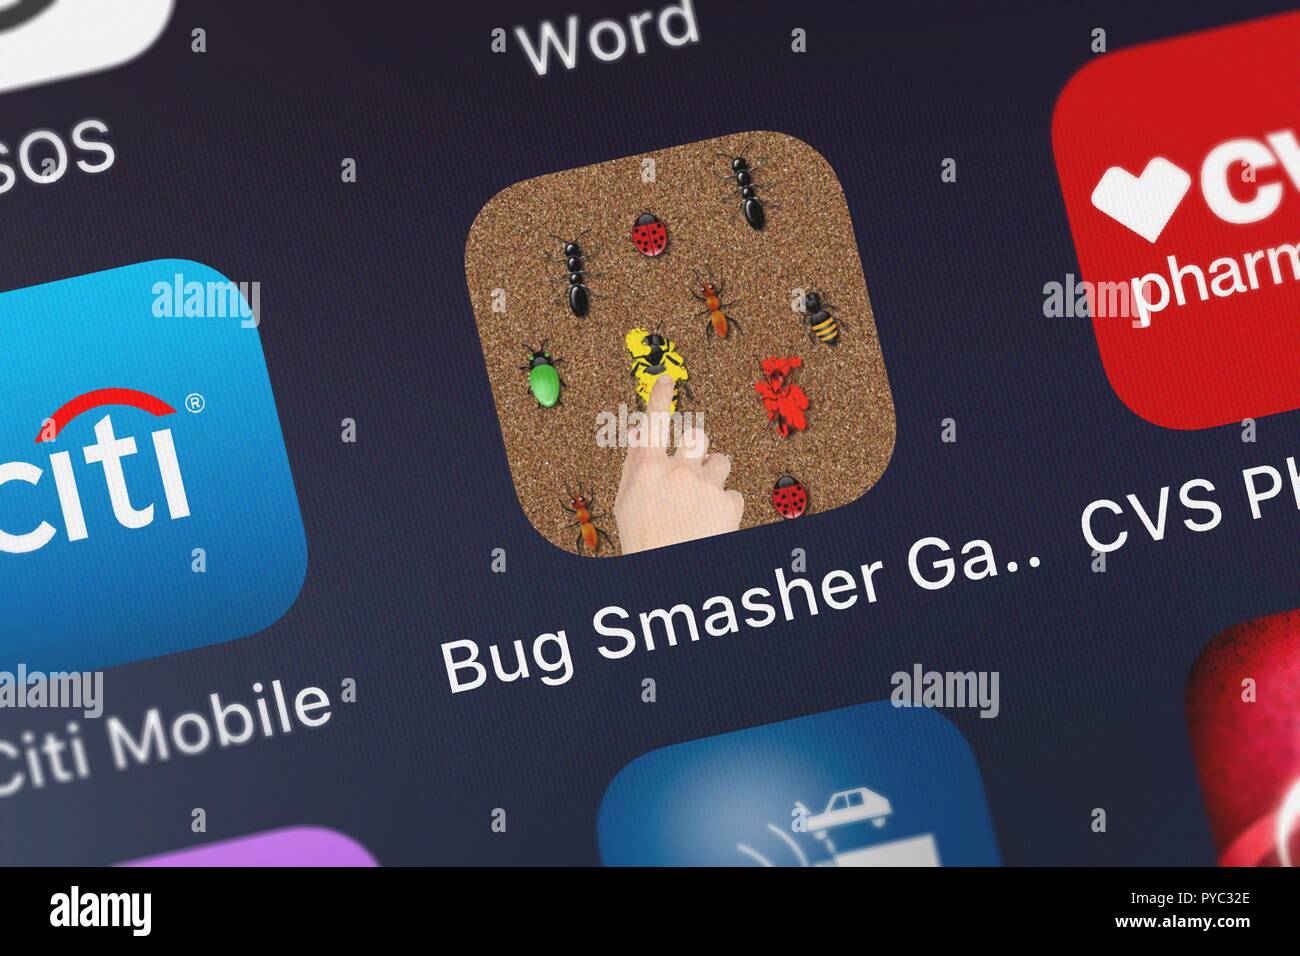 London, United Kingdom - October 26, 2018: Close-up of the Bug Smasher Game icon from Pop-ok.com on an iPhone. Stock Photo